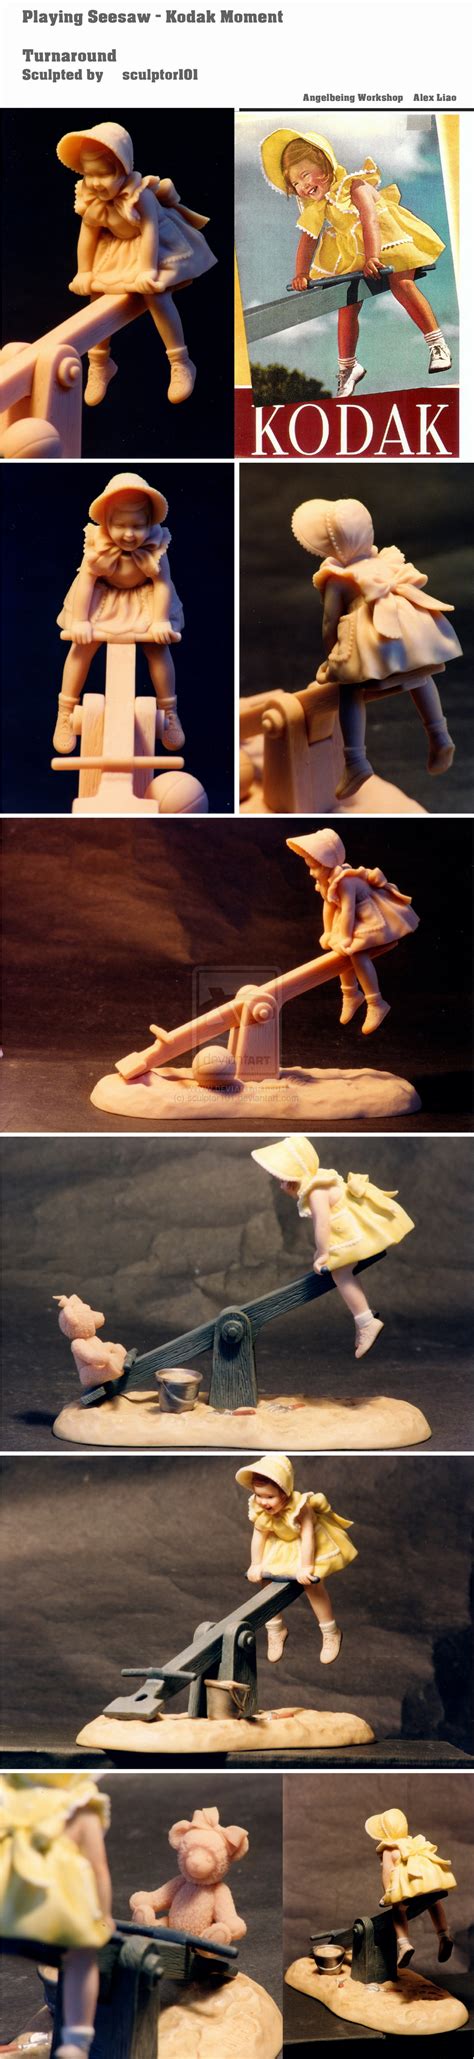 Playing Seesaw - Kodak Moment by sculptor101 on deviantART | Kodak moment, Kodak, In this moment